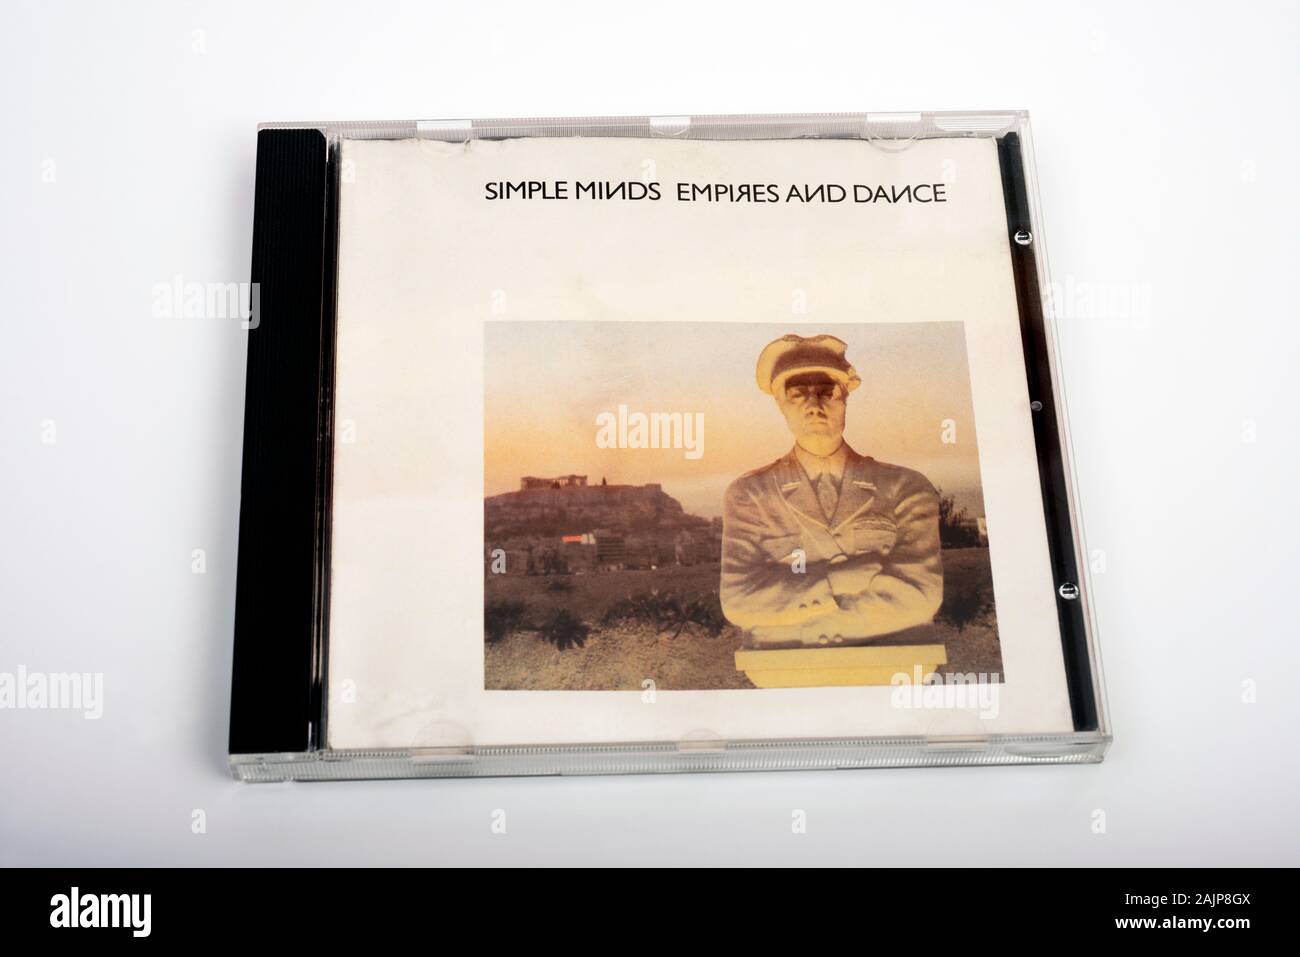 Simple Minds Empires and Dance CD Stock Photo